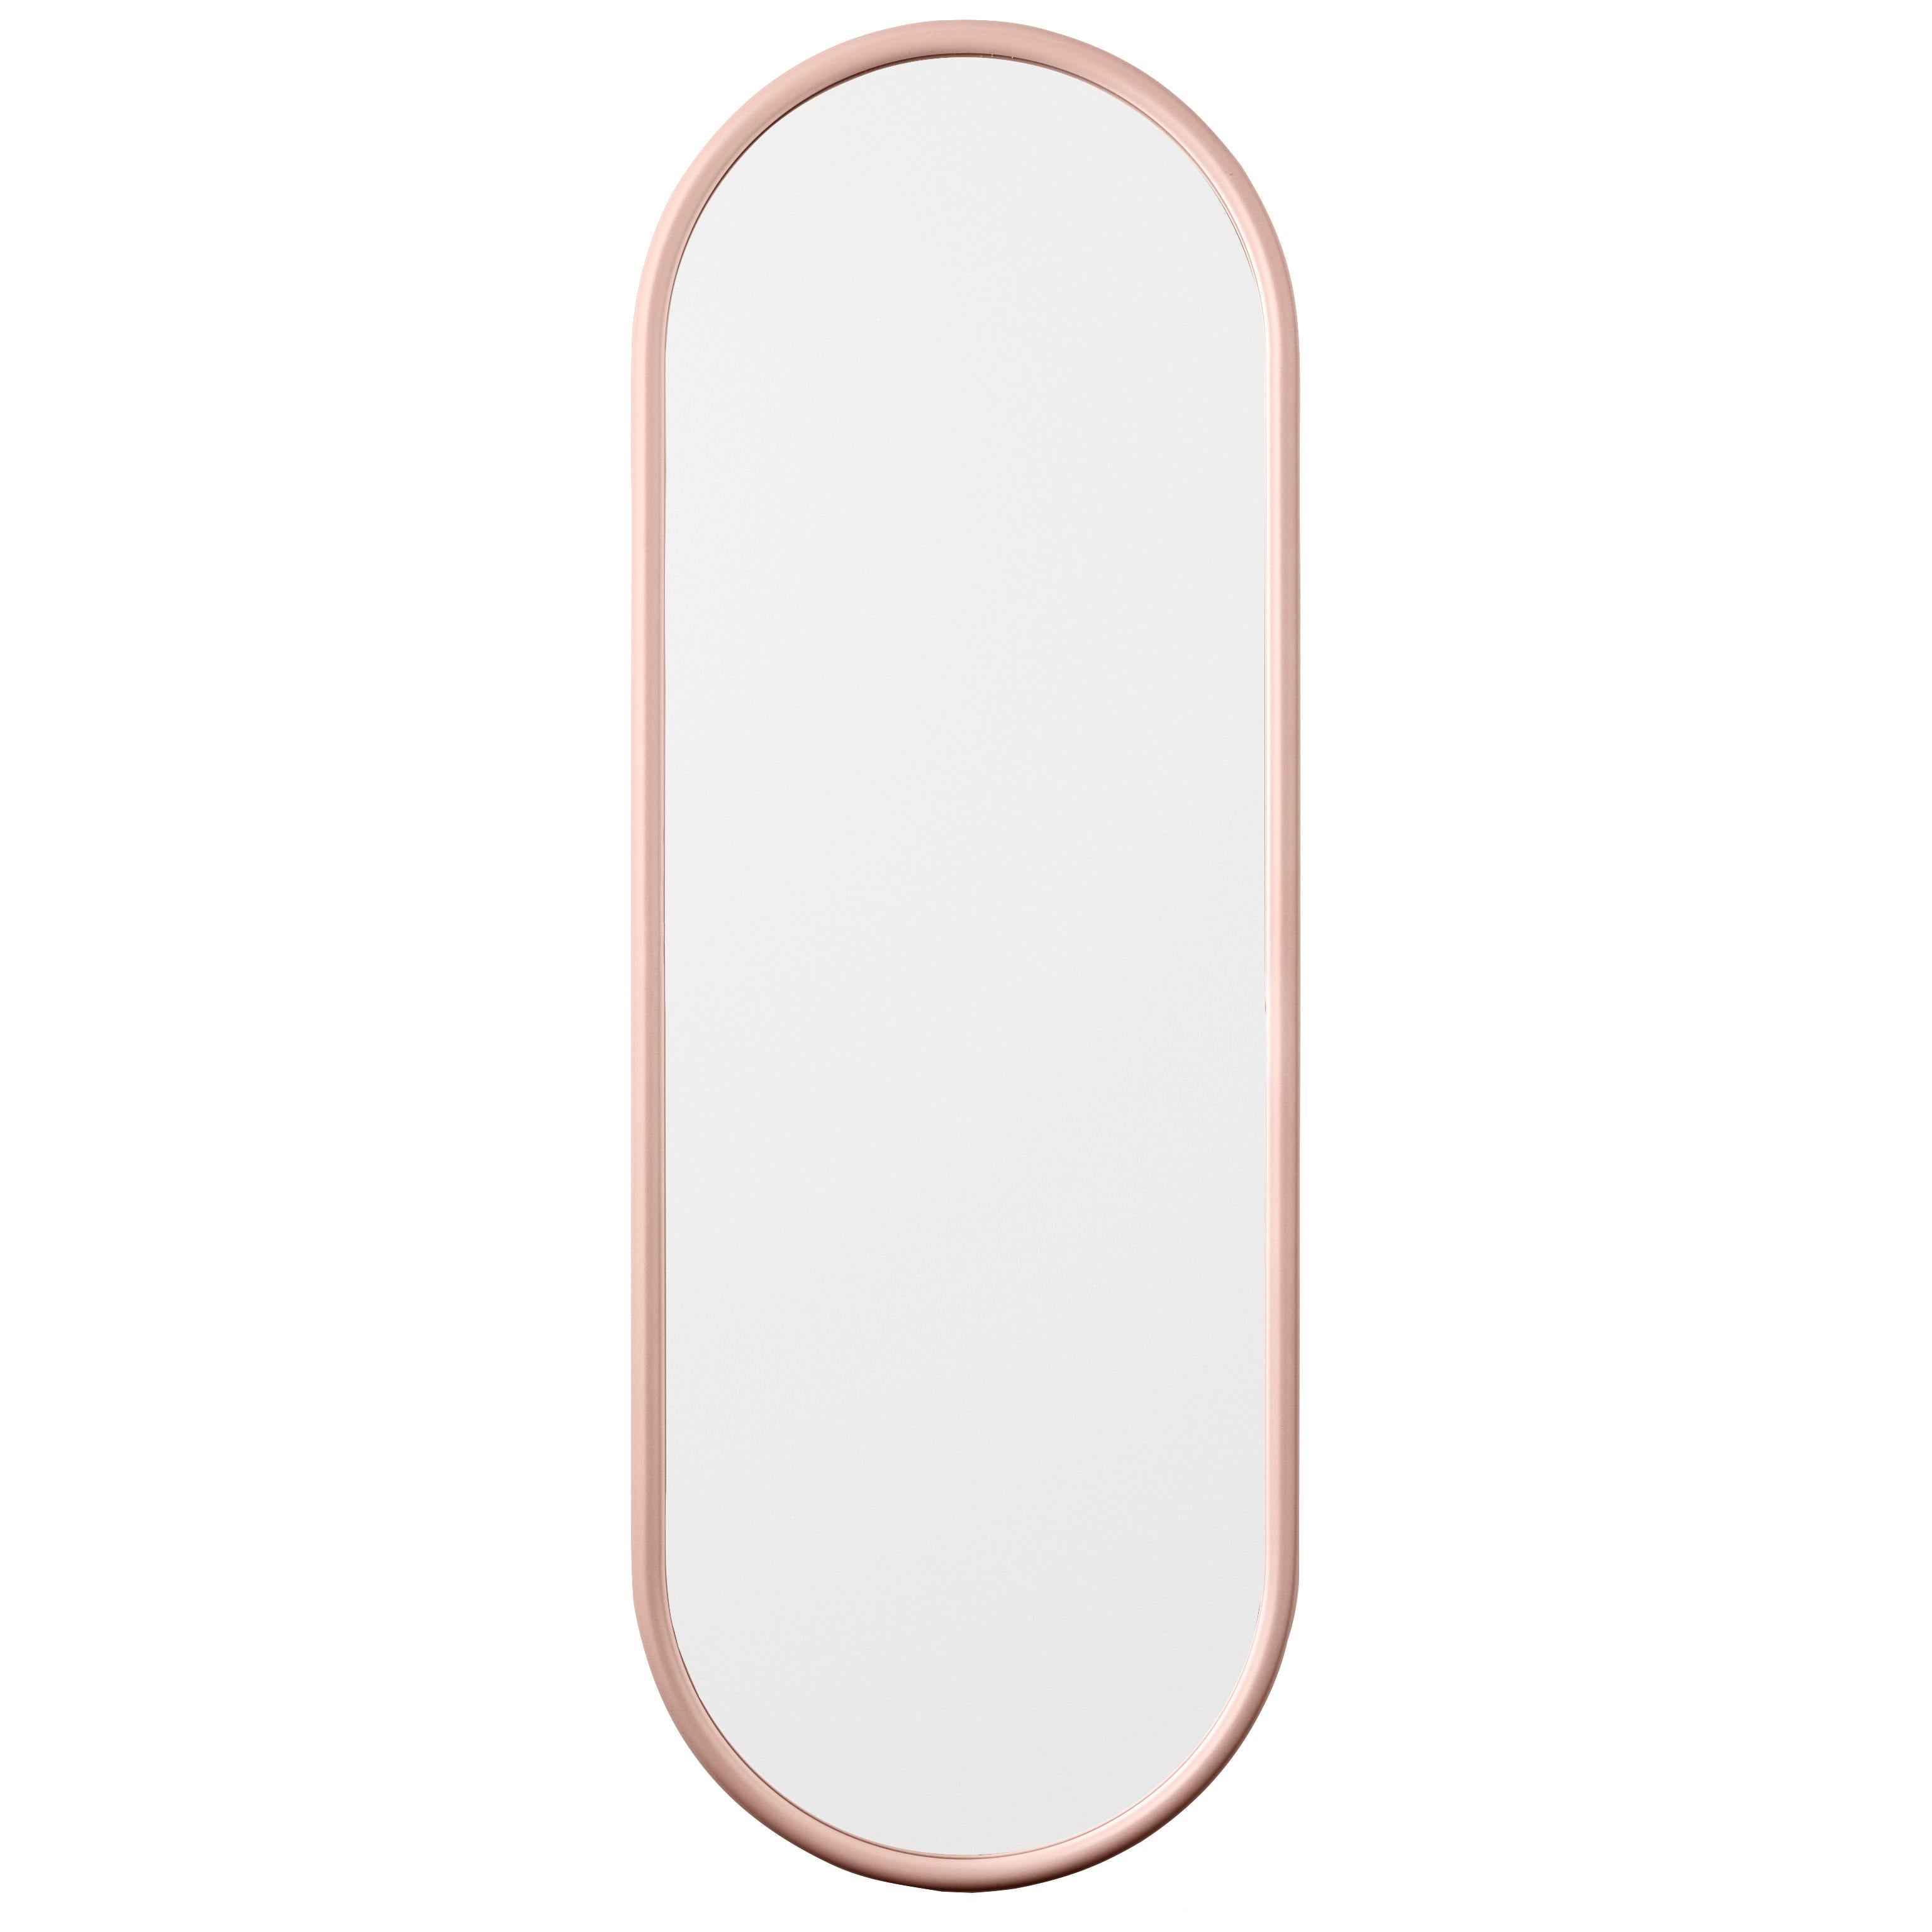 Angui Rose oval large mirror by AYTM
Dimensions: 39 x 2 x 108 cm
Materials: Glass, copper, MDF

The Angui mirror with its simple pipe-styled frame is a beauty for any bathroom, hallway, or maybe bedroom. Use a single one or add several together.